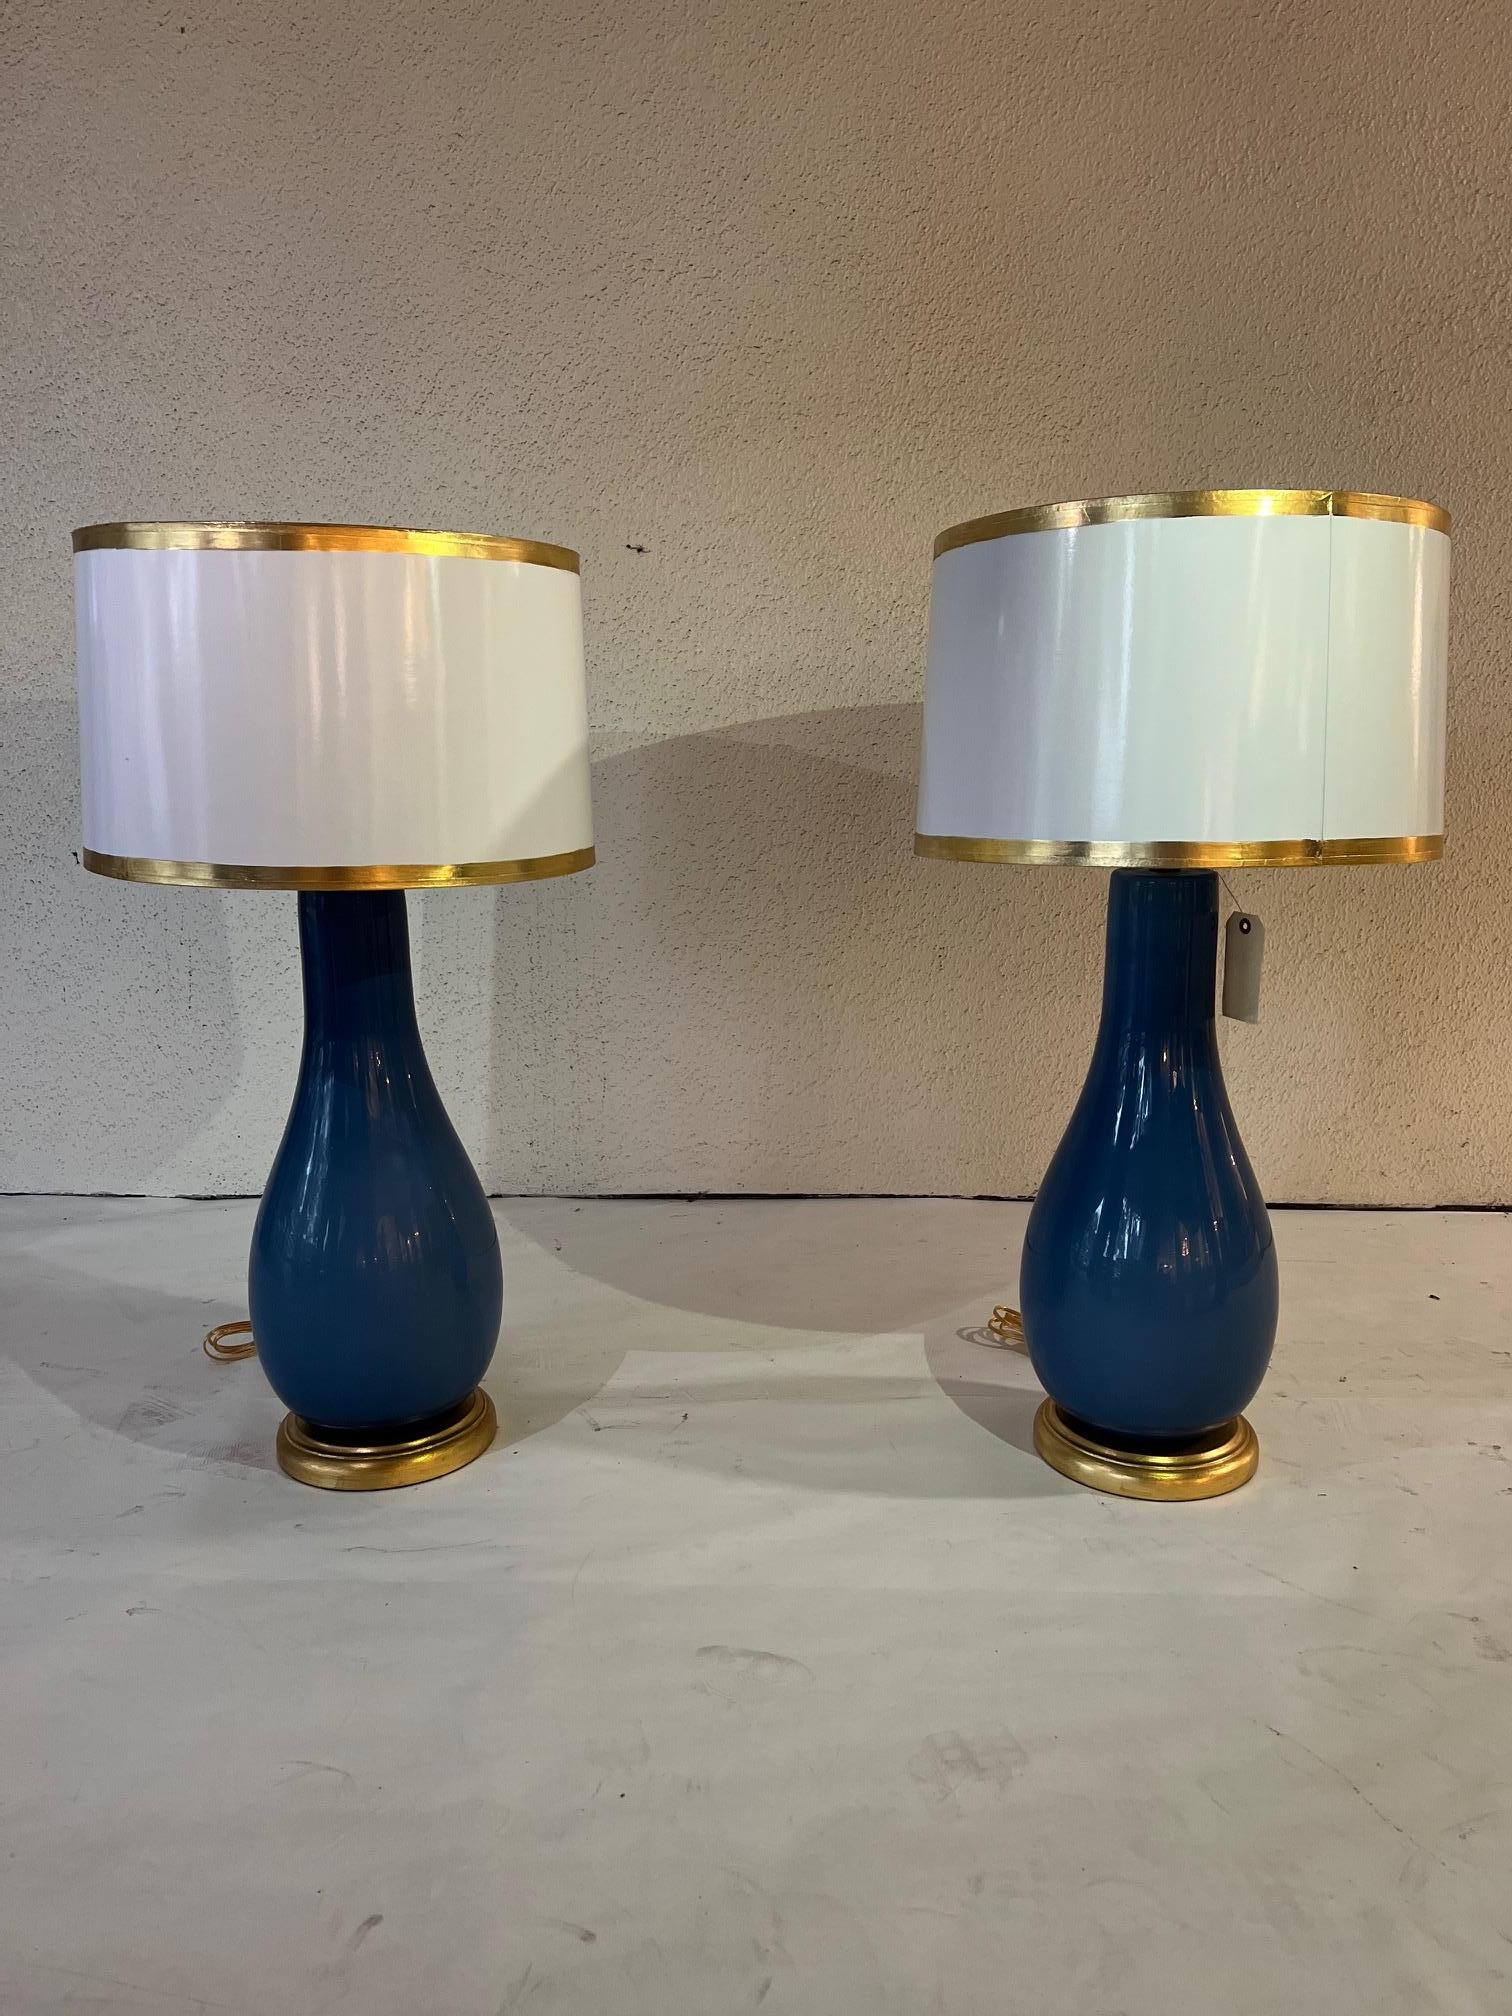 Venetian glass lamps- A pair in a beautiful blue with gold bases. With white and gilt trimmed shades.